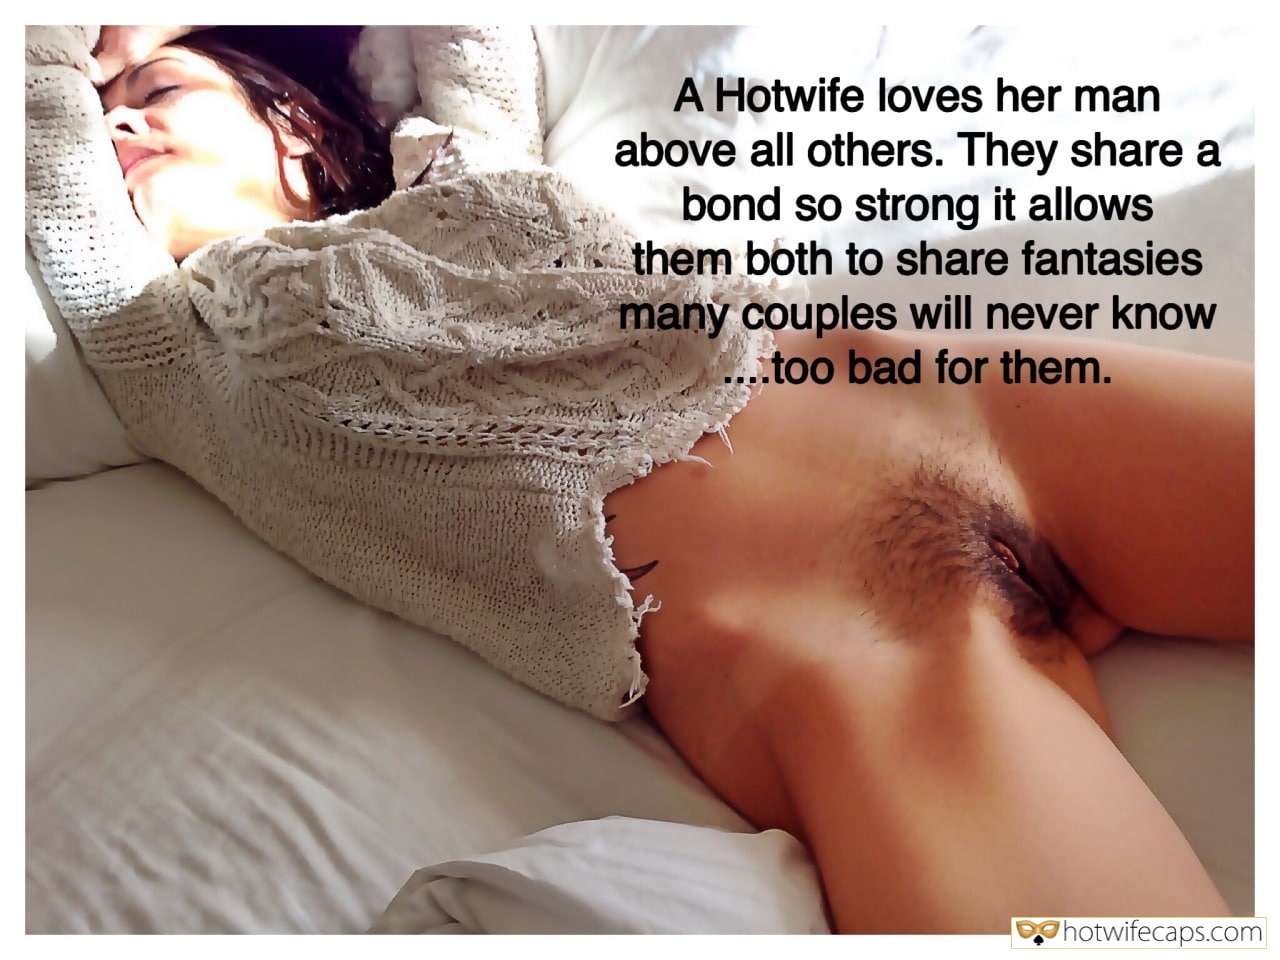 My Favorite hotwife caption: A Hotwife loves her man above all others. They share a bond so strong it allows them both to share fantasies many couples will never know …too bad for them. Her Horny Imaginations for Hairy Pussy